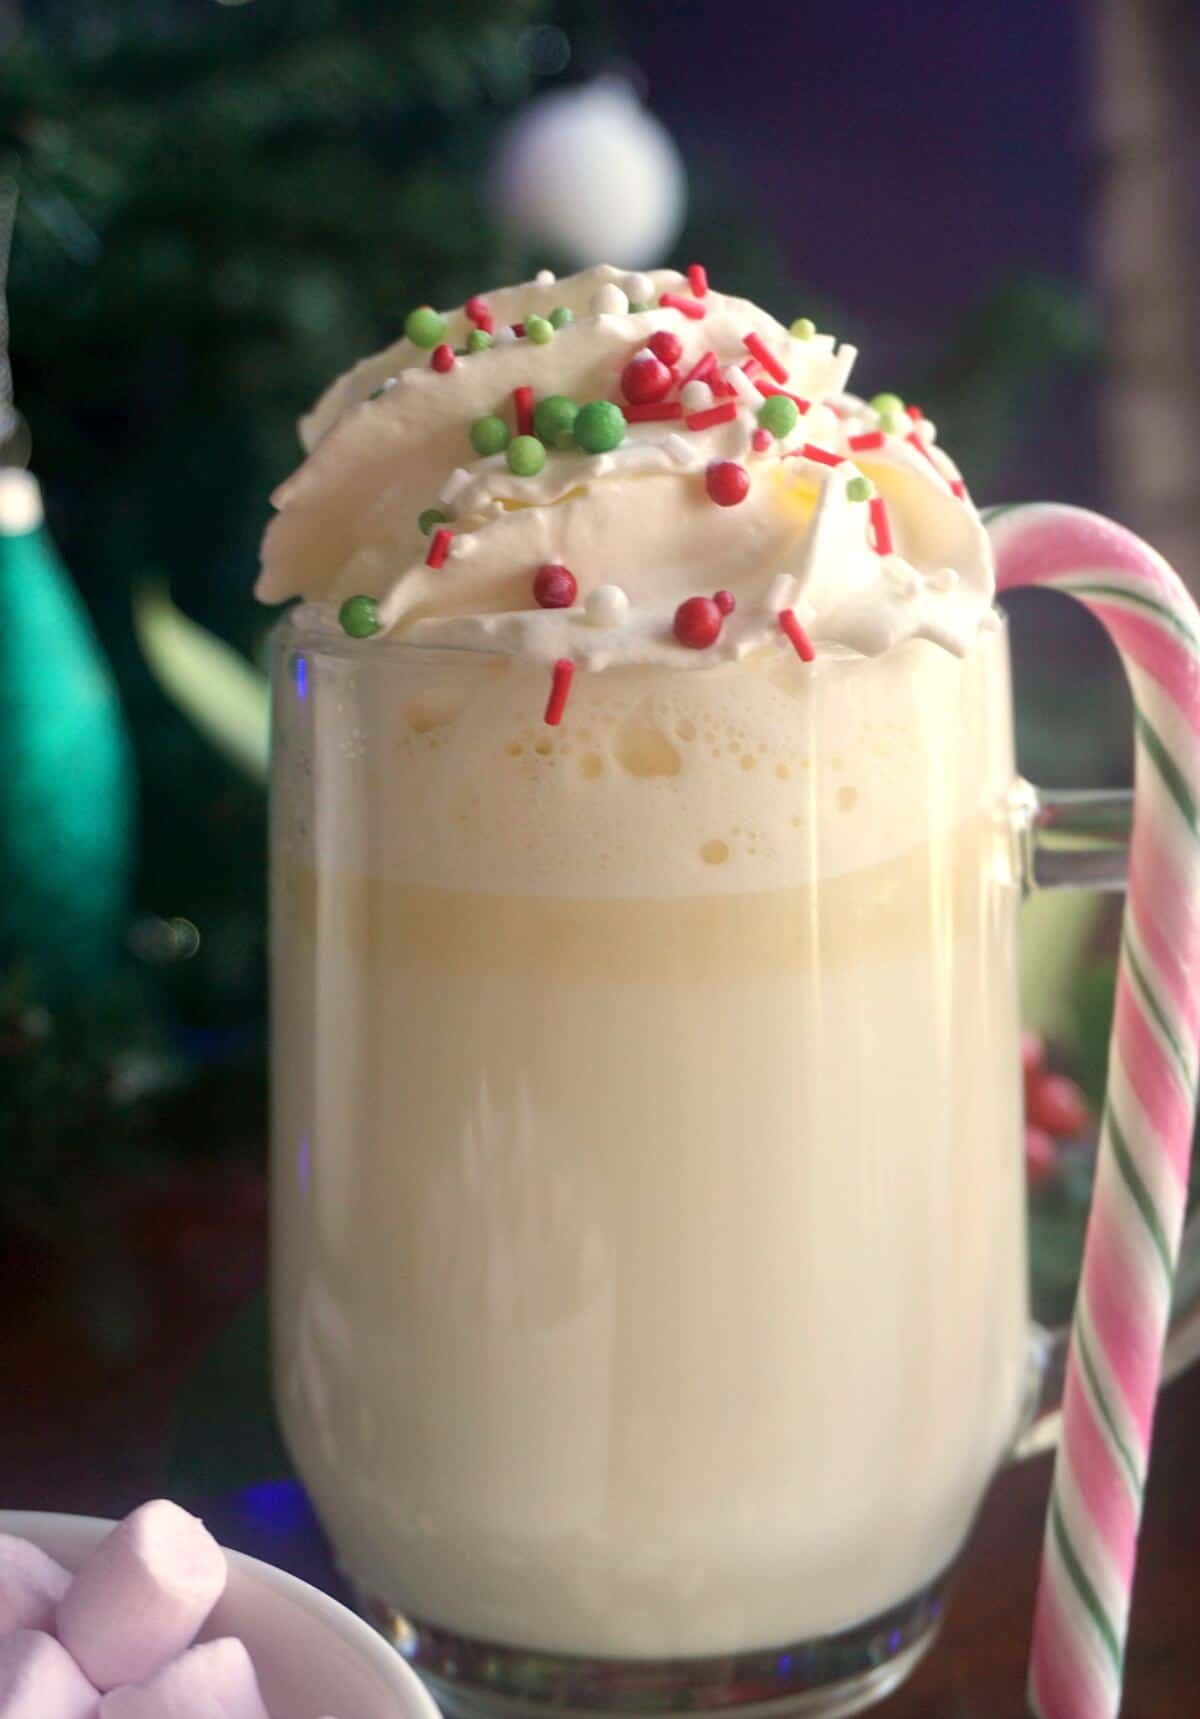 A glass of white hot chocolate with cream and sprinkles and a candy cane.